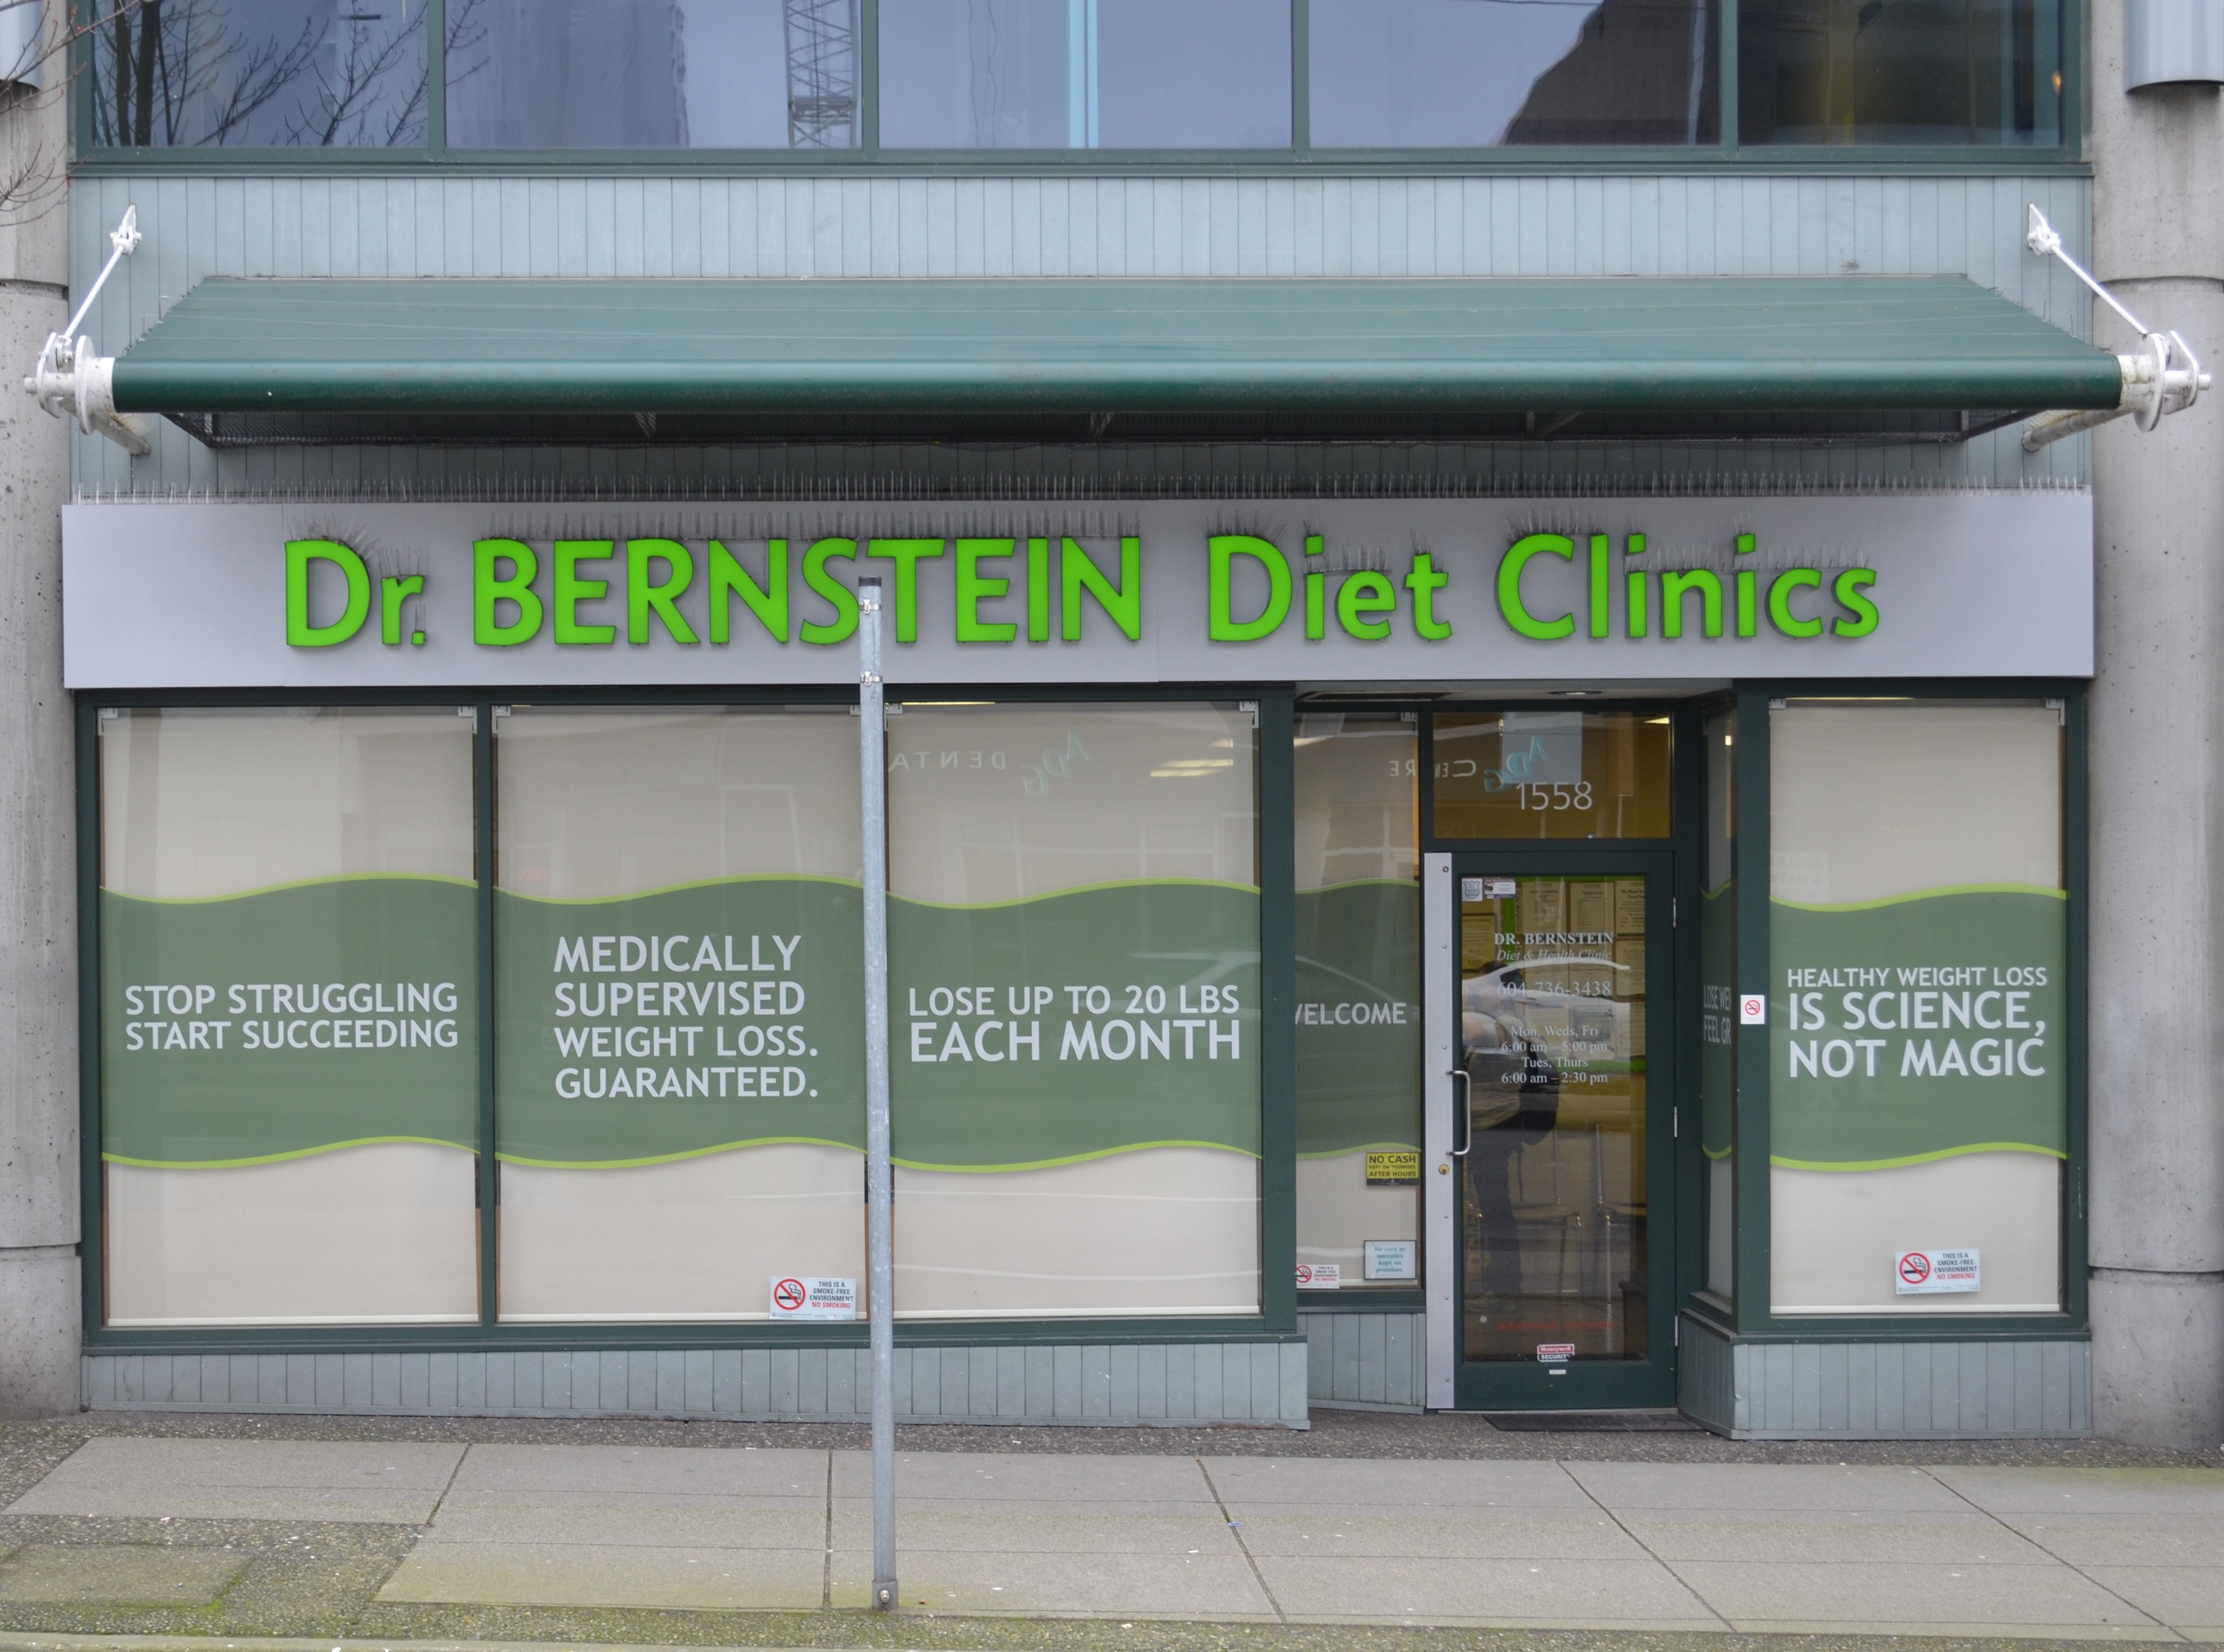 Dr. Bernstein Weight Loss & Diet Clinic, West Broadway - Vancouver, British Columbia